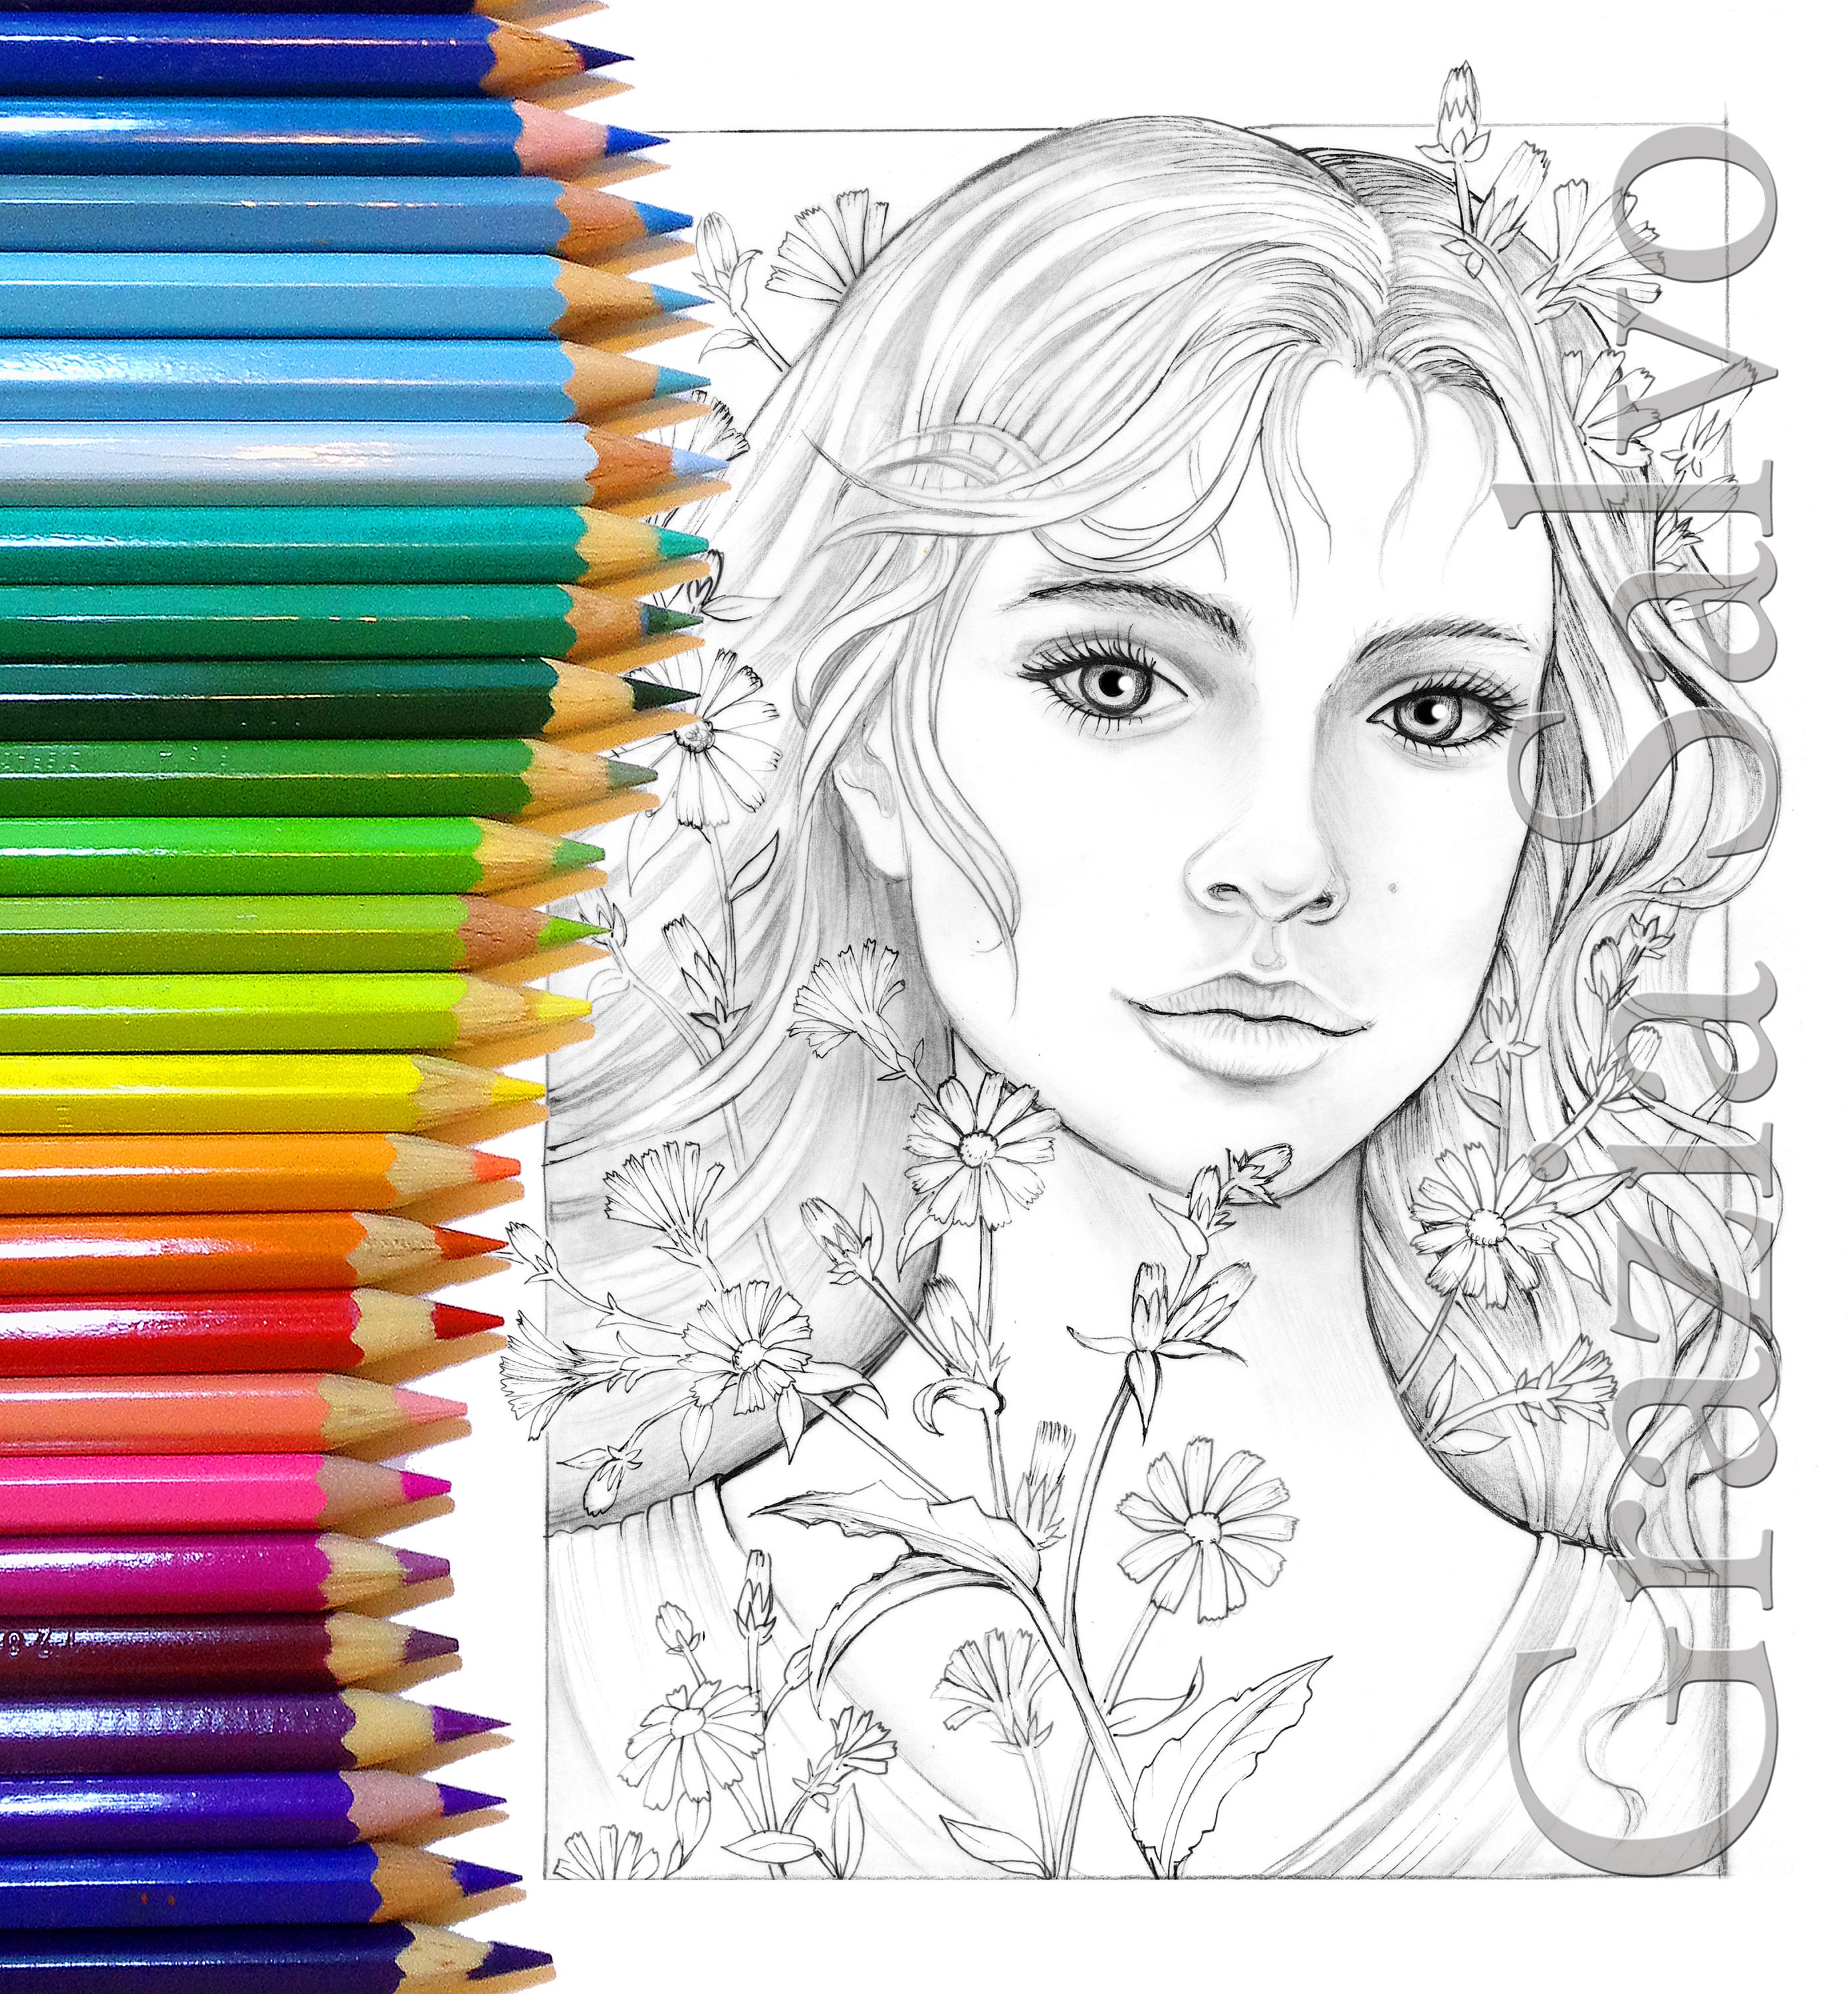 Brightness. the Women of Flowers Collection 3. Spiral Bound Grayscale Coloring  Book for Adults. Grazia Salvo Art. Beautiful Women Portraits. 